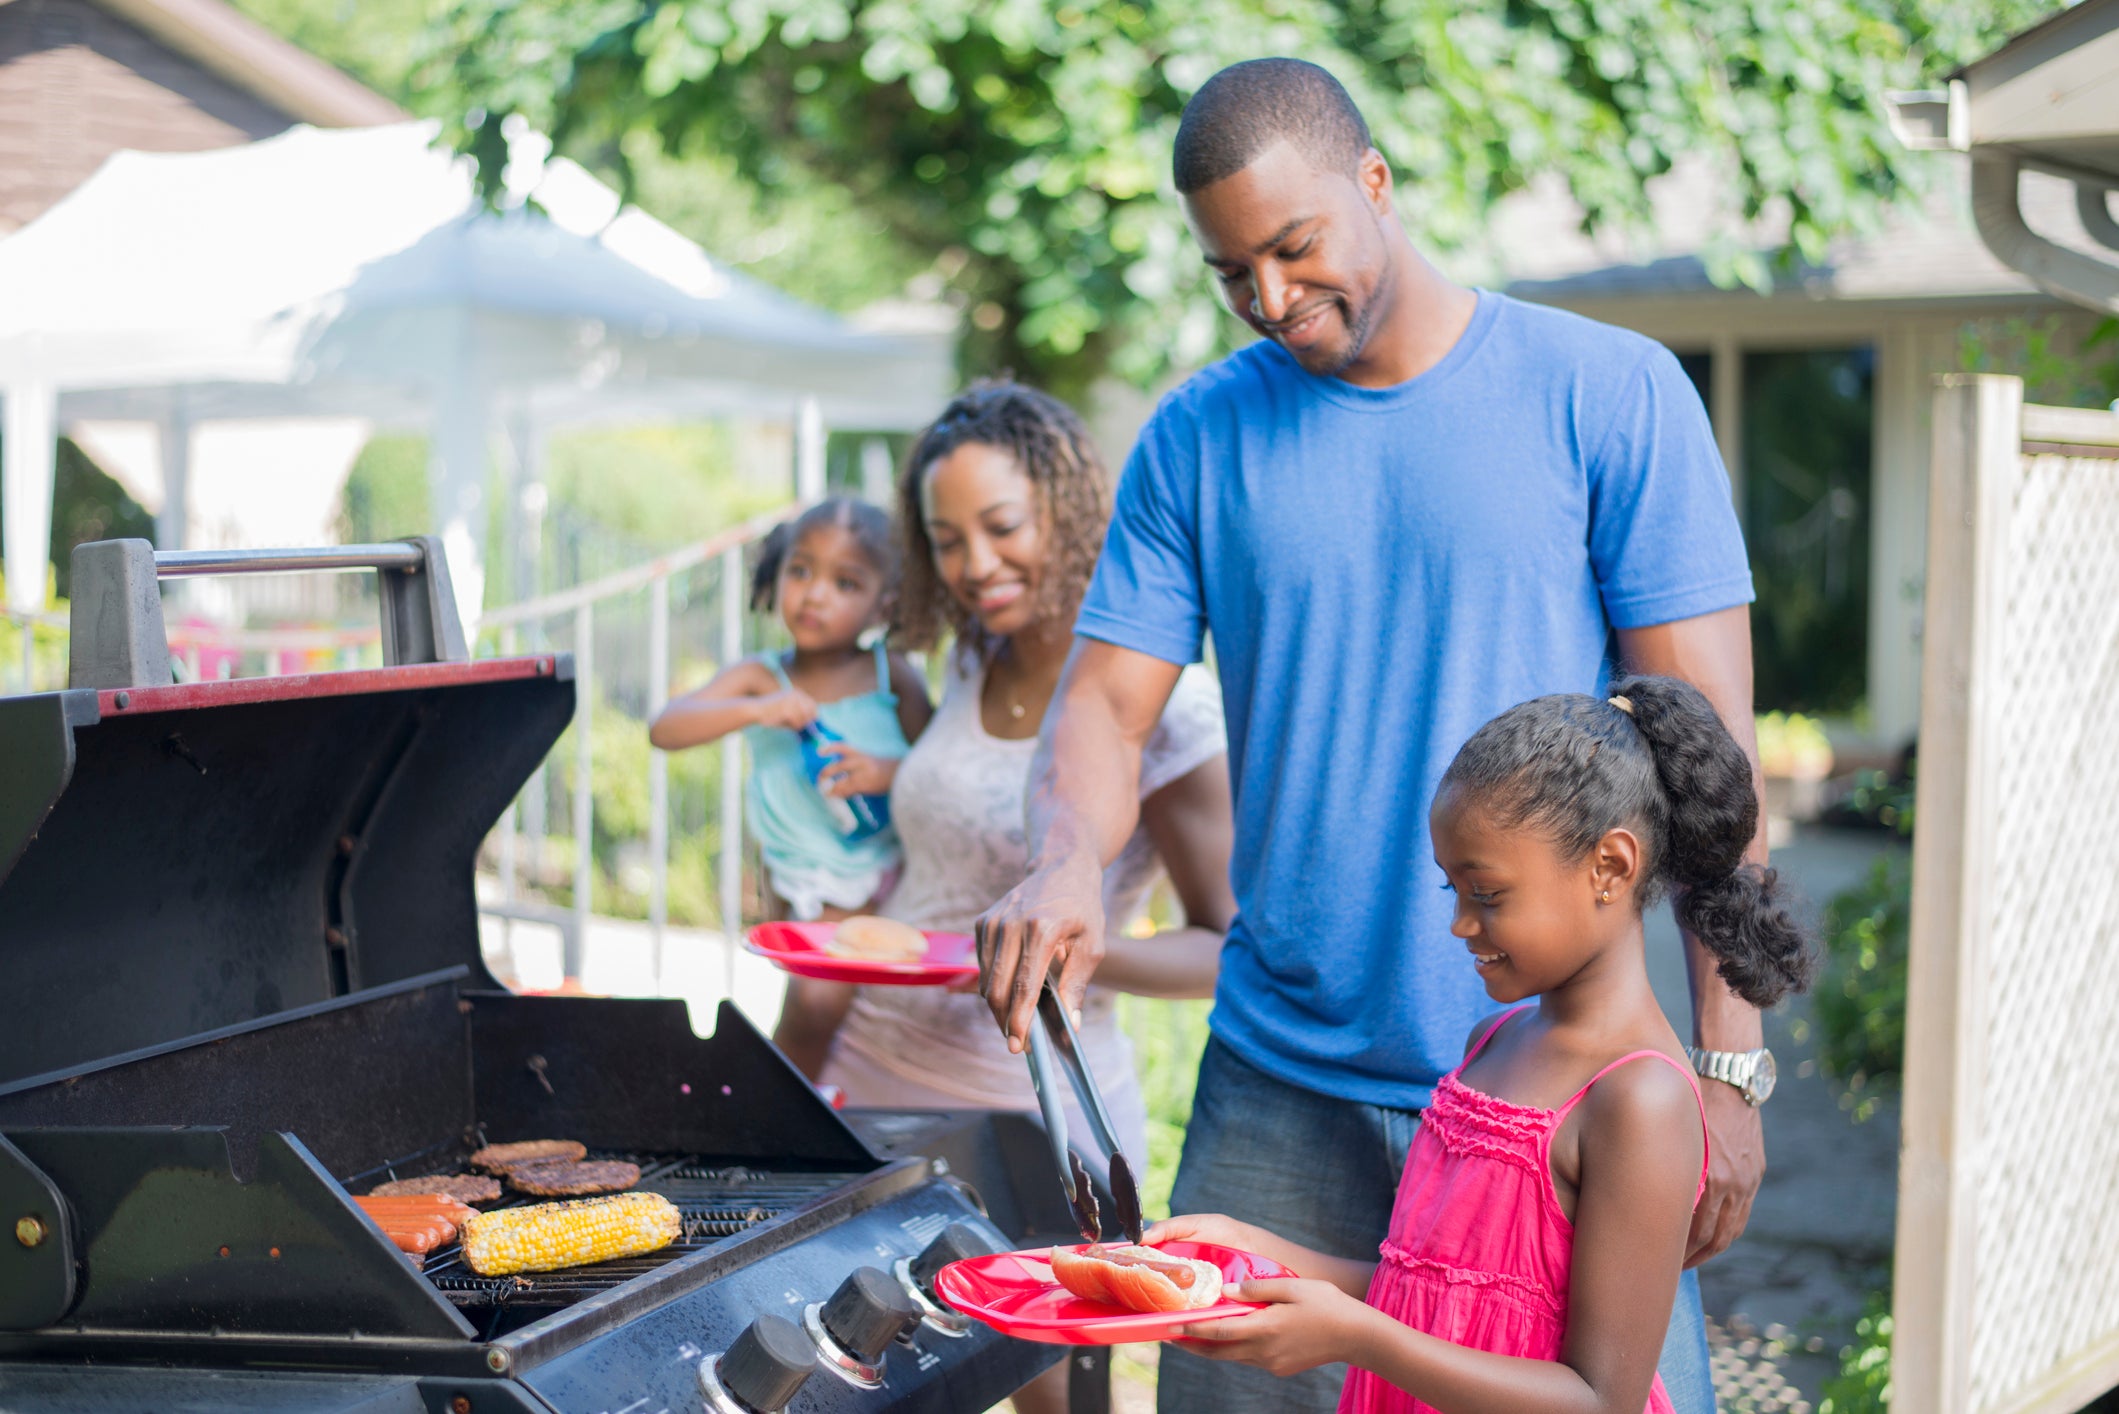 Top Five Conversations We Don’t Want To Hear At The Juneteenth Cookout